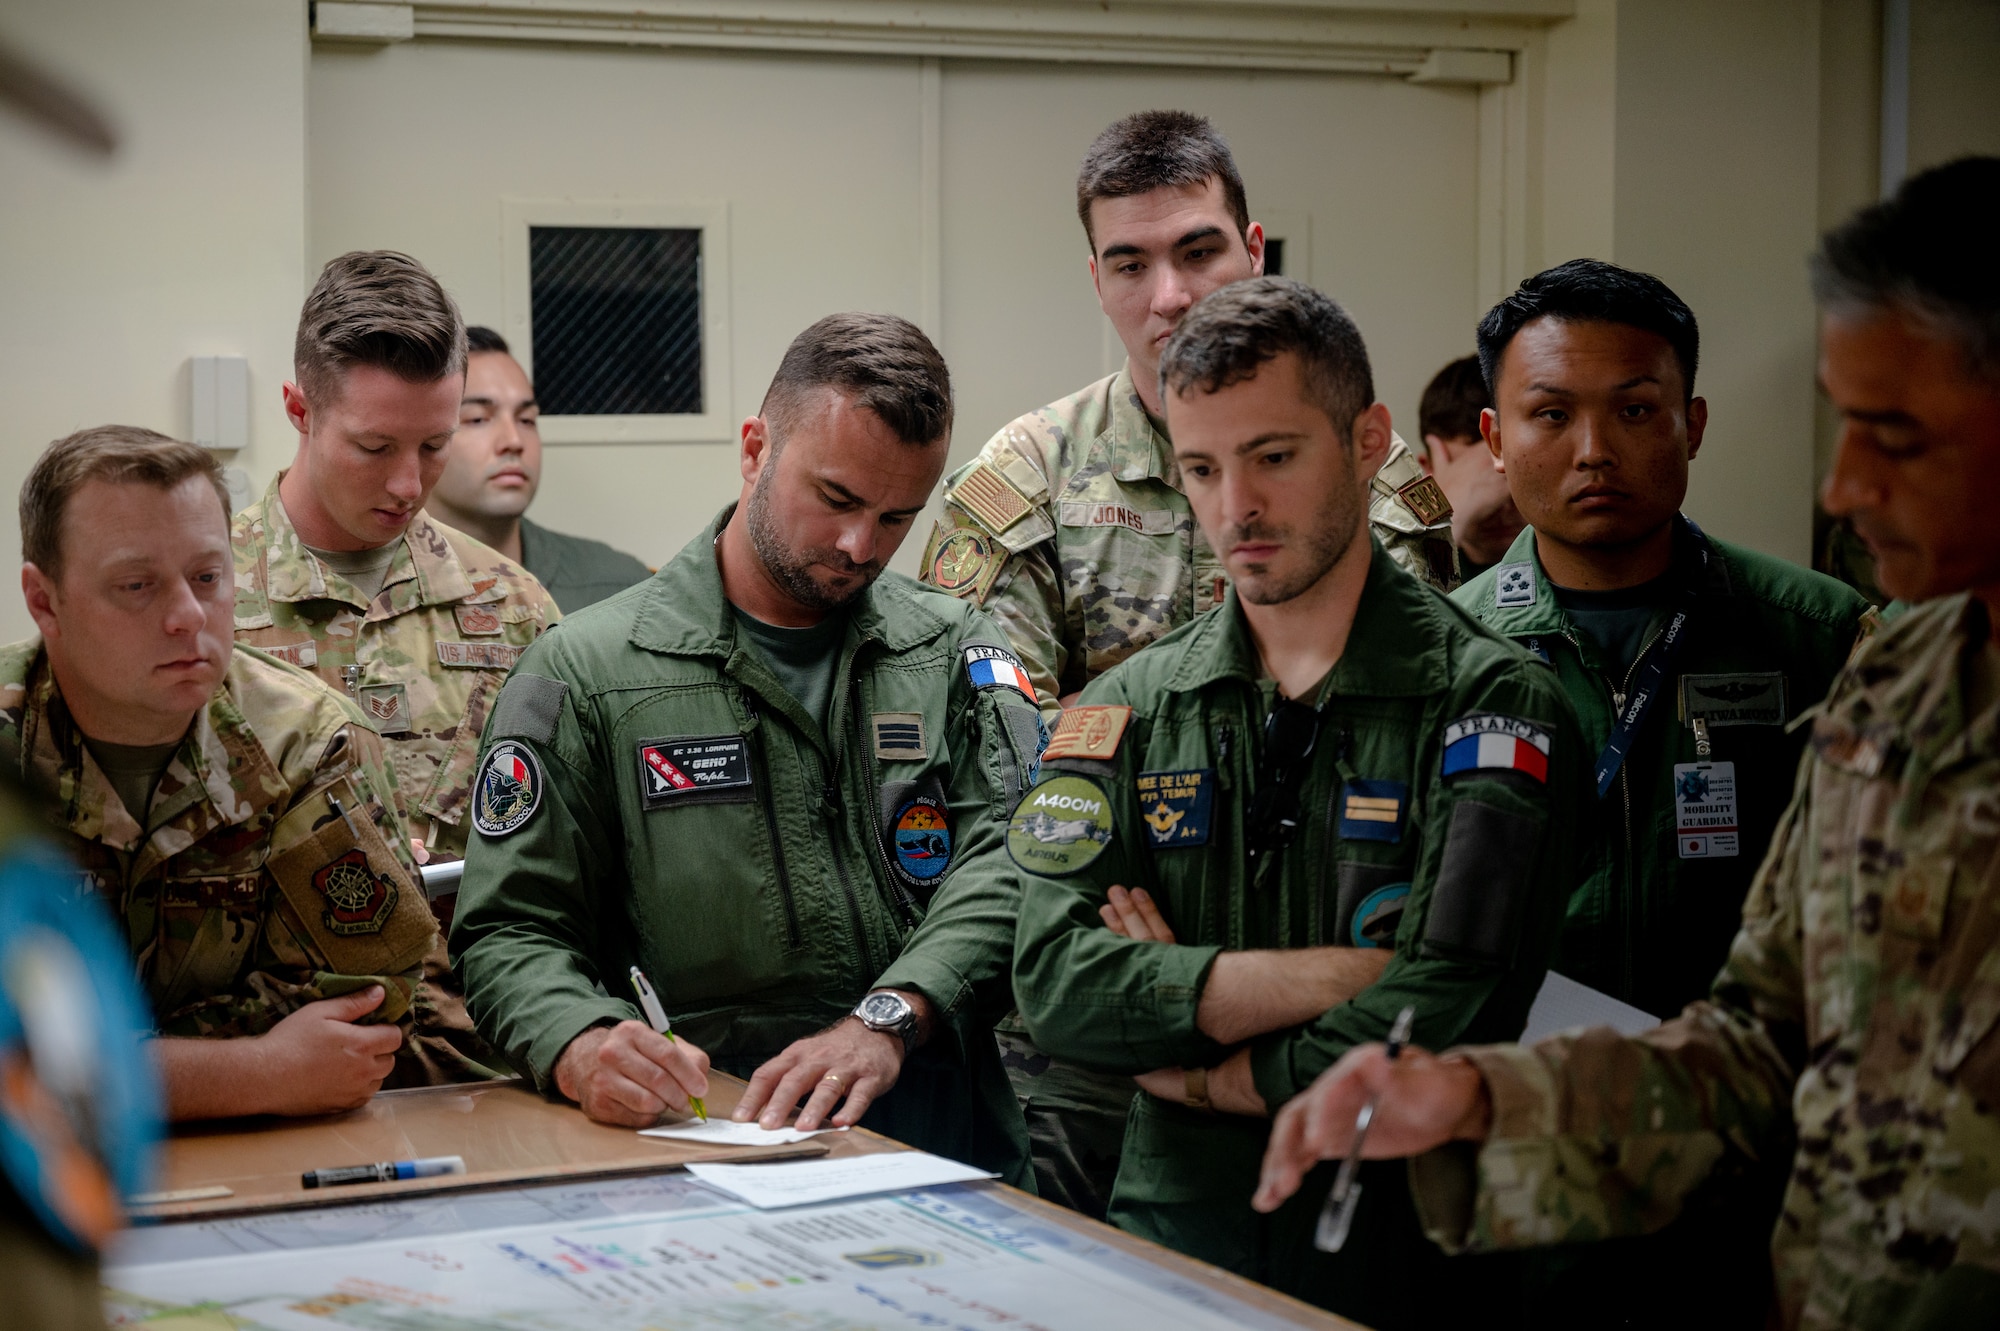 Members from multiple nations air forces gather together to plan an elephant walk during Mobility Guardian 23 in Andersen Air Force Base, Guam, July 18, 2023. MG23 is a multilateral exercise involving joint foreign partners to showcase coalition ability in the INDOPACOM area of responsibility.  (U.S. Air Force photo by Tech. Sgt. Sean Carnes)